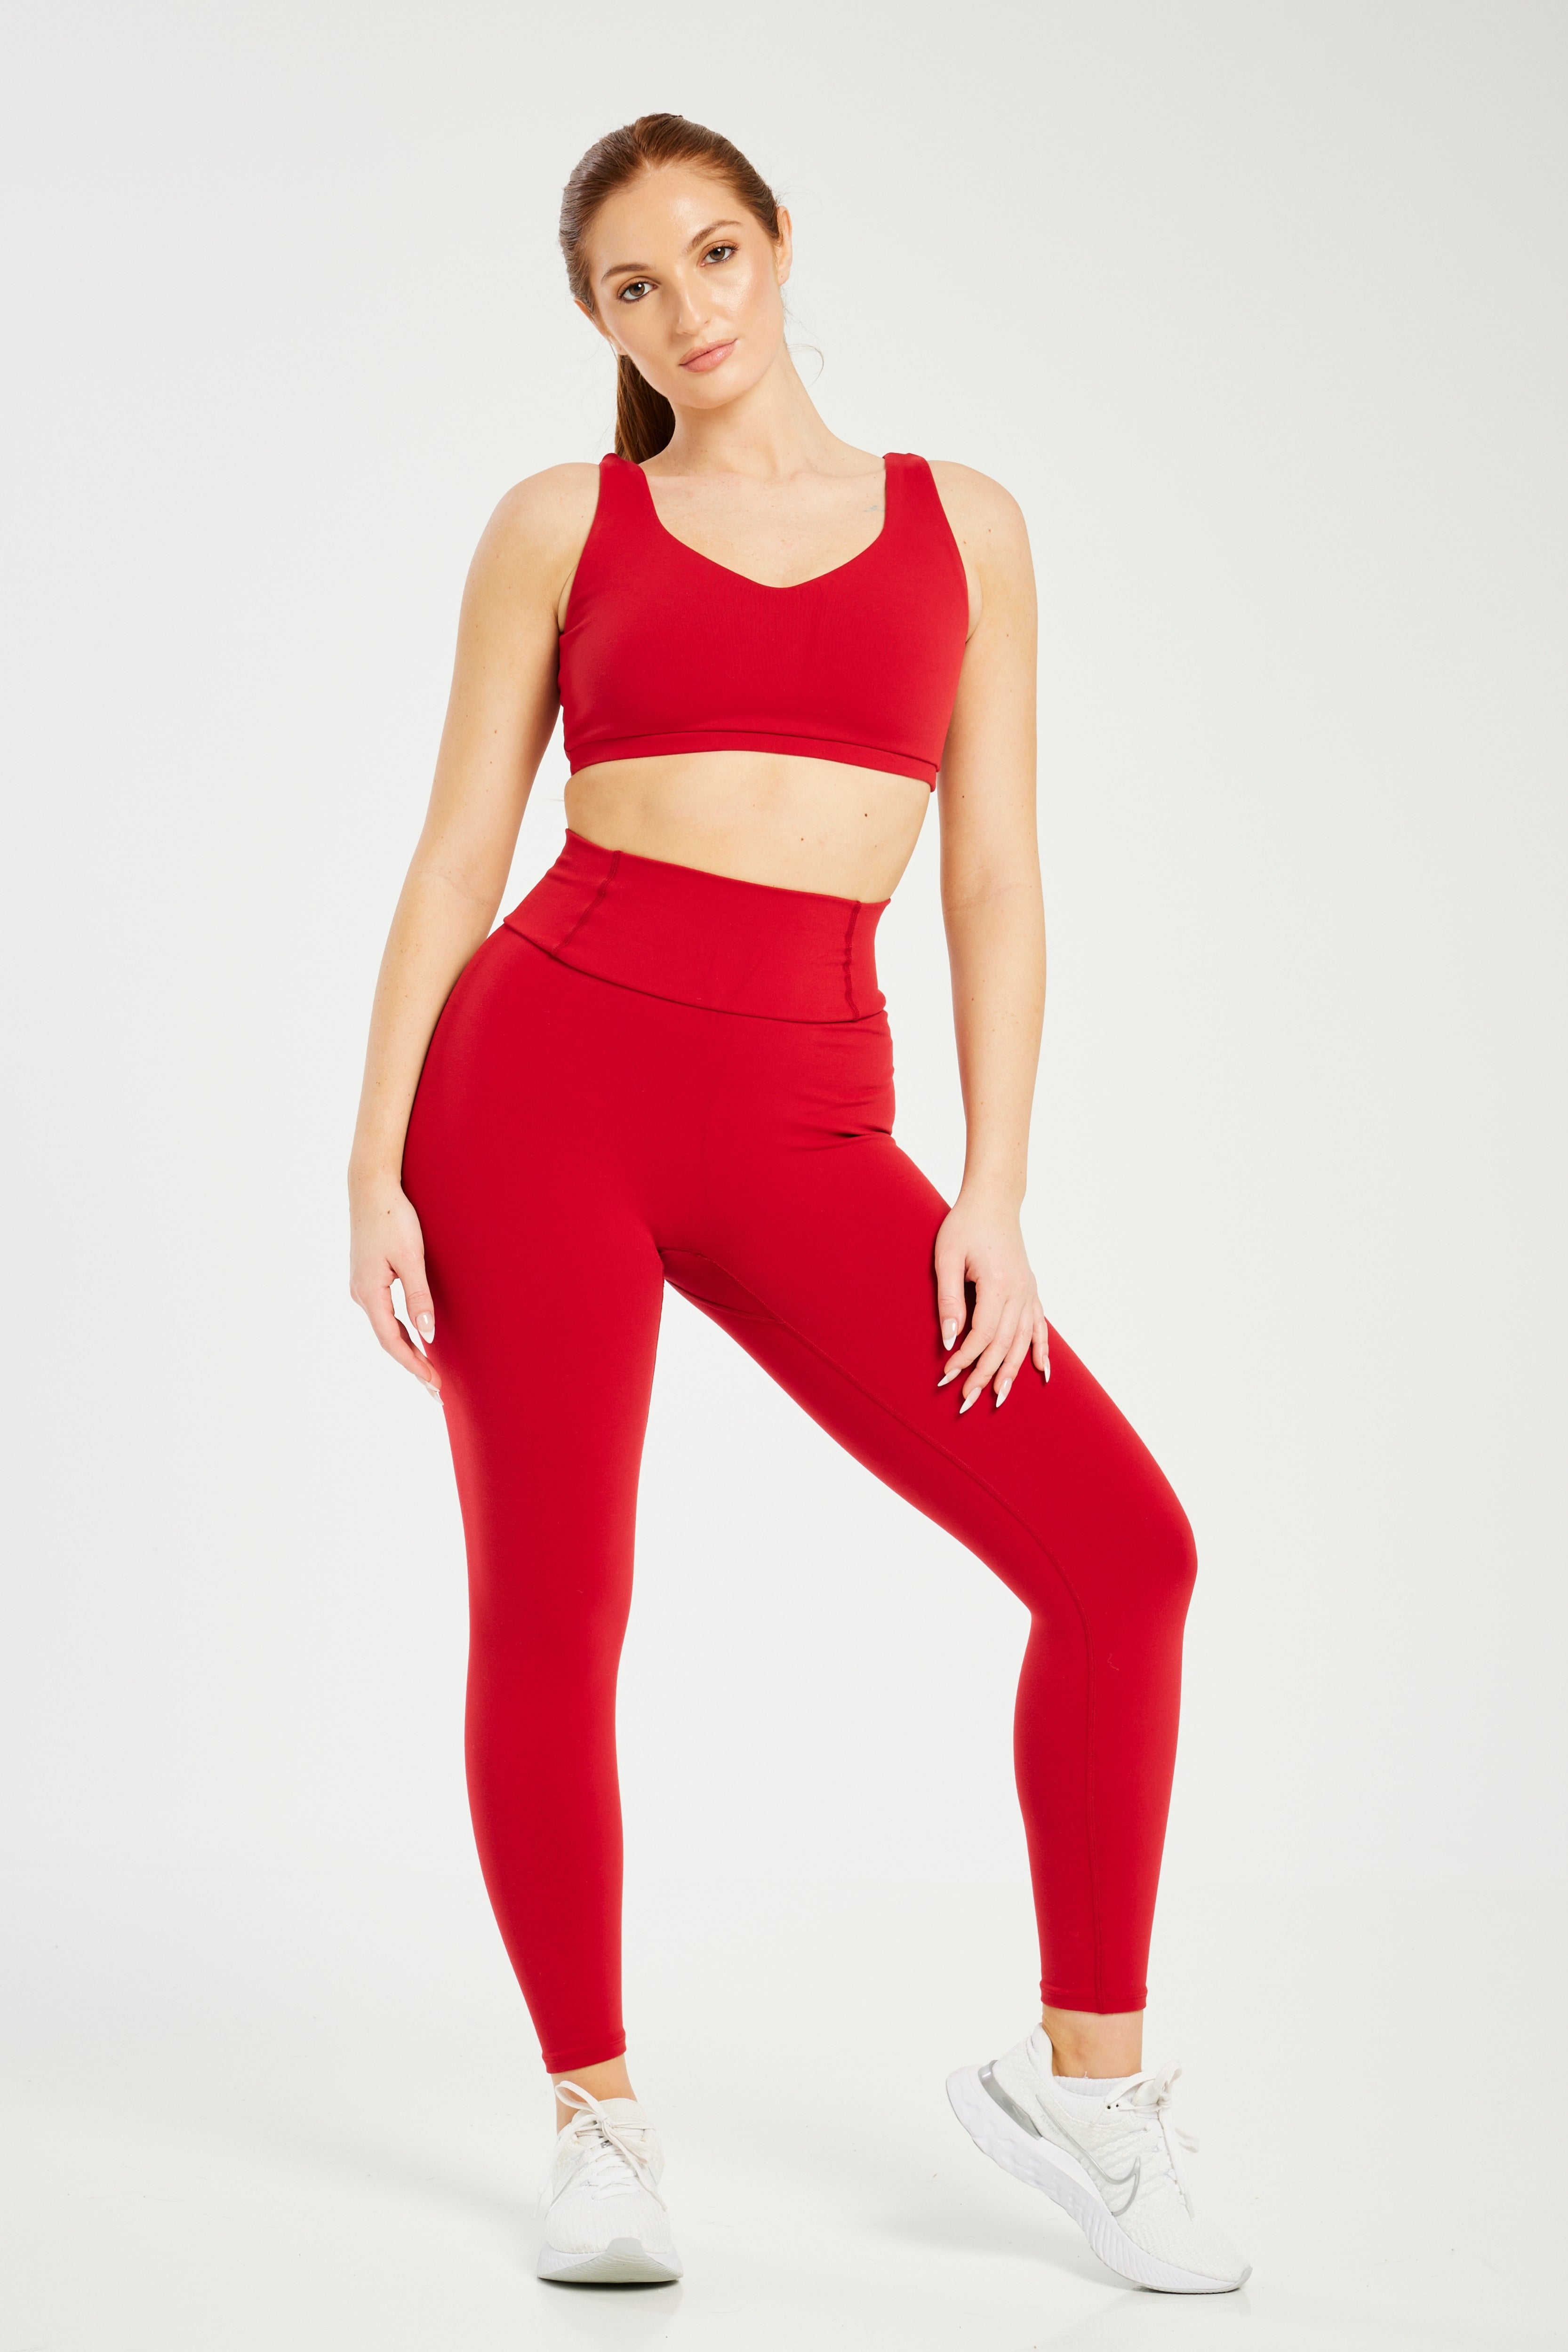 Woman in Red Sports Bra and Black Leggings Stretching · Free Stock Photo